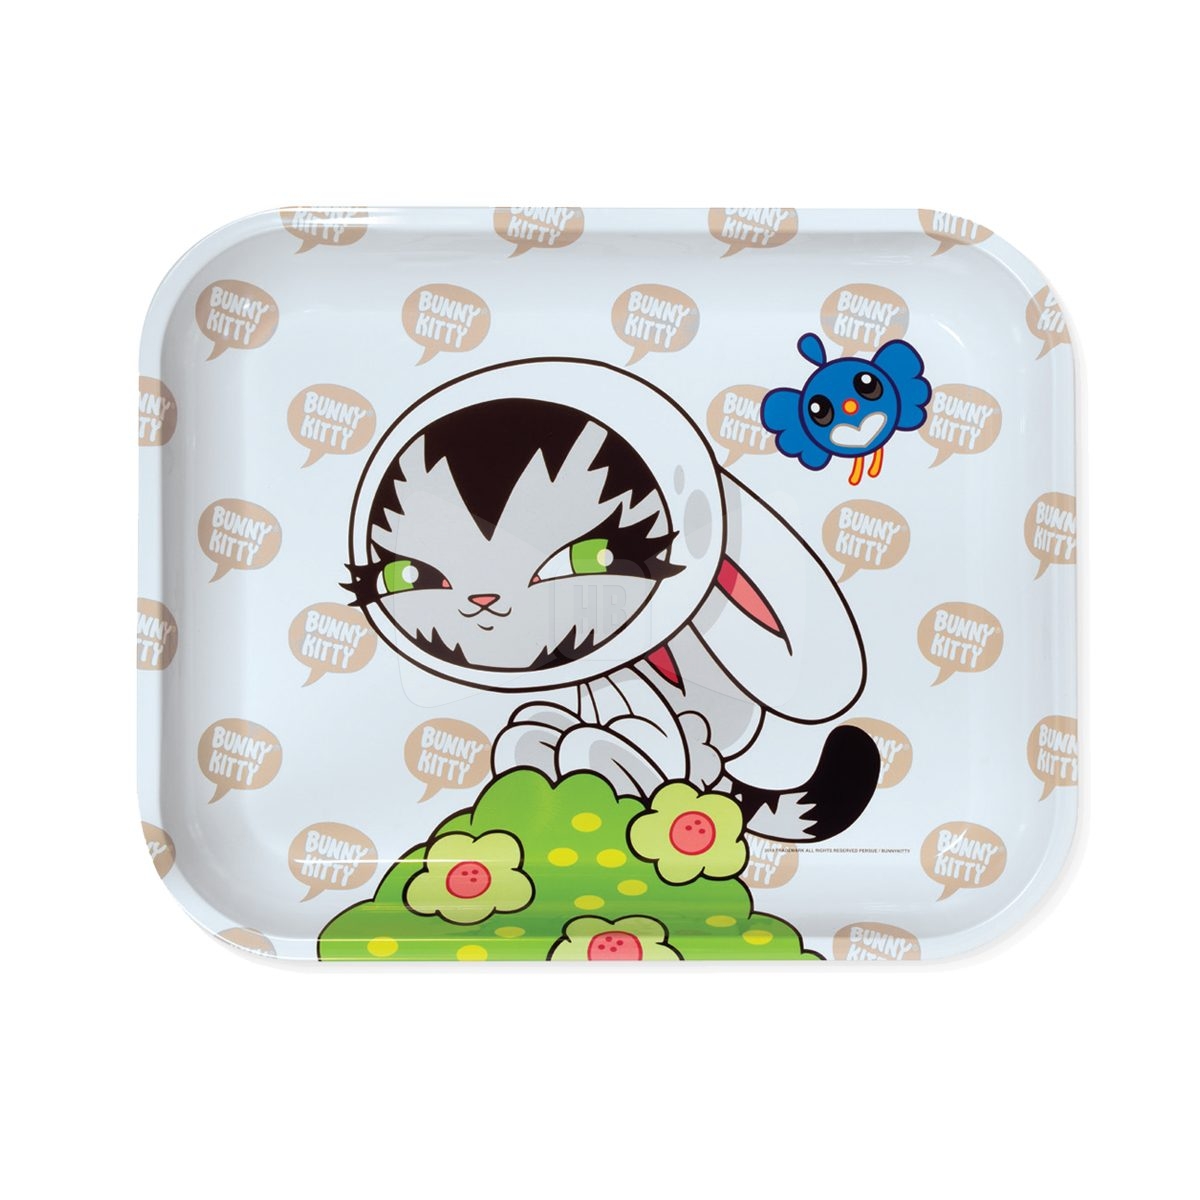 Persue Bunny Kitty Large Tray